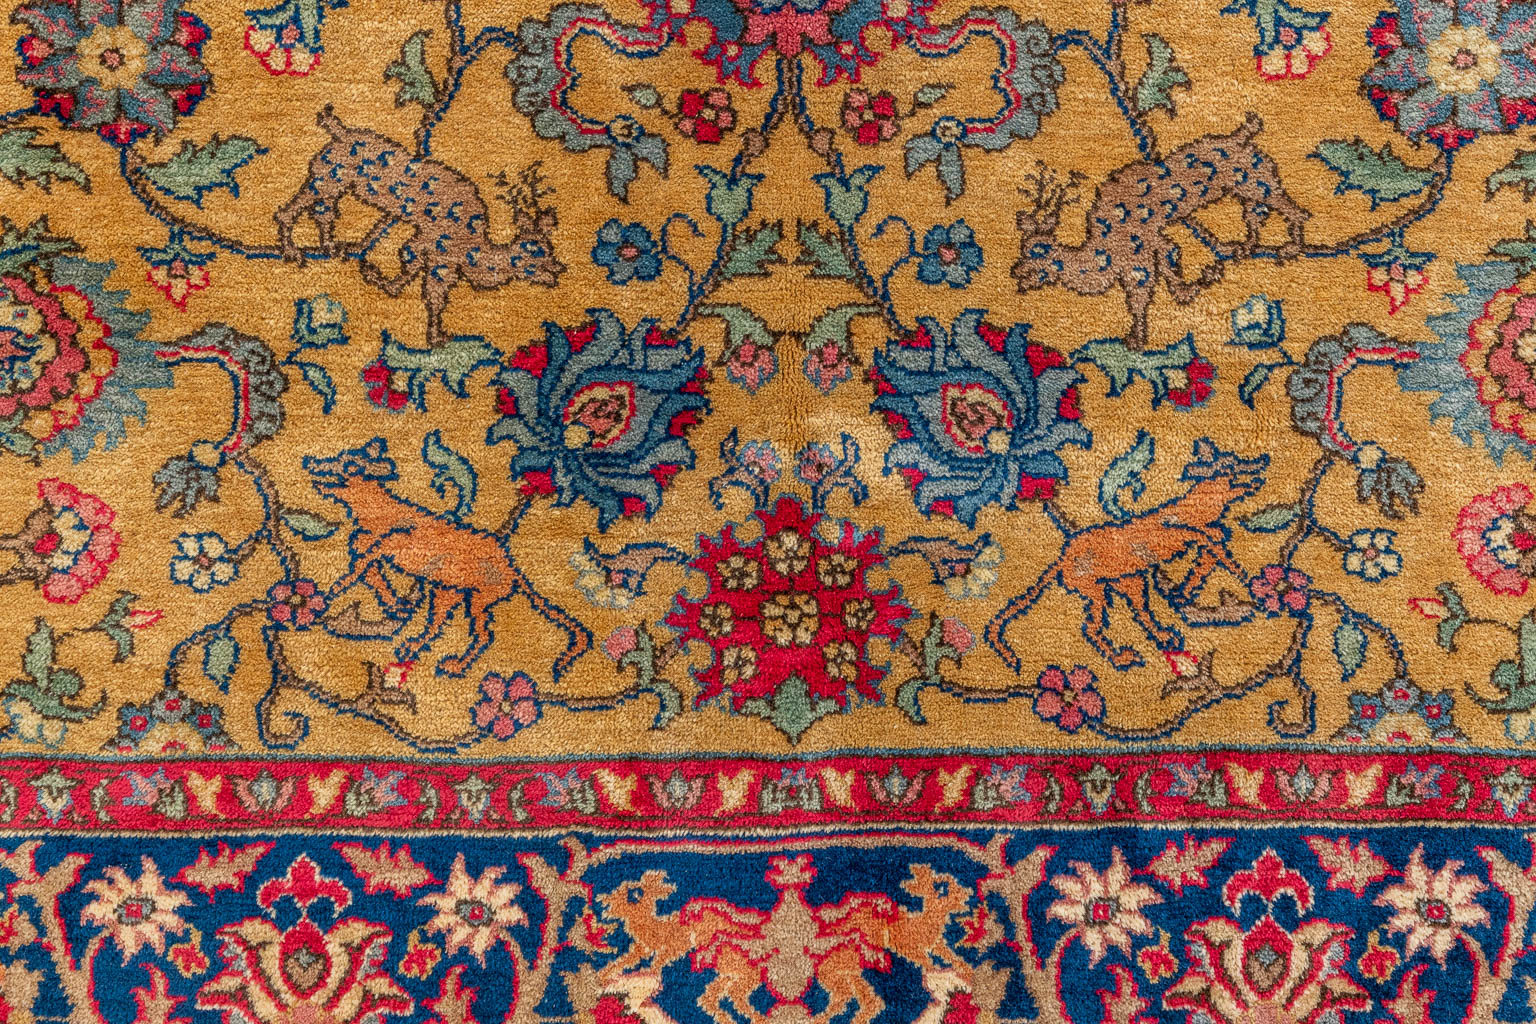 An Antique Oriental hand-made carpet decorated with animals, Kashan. (D:253 x W:153 cm)